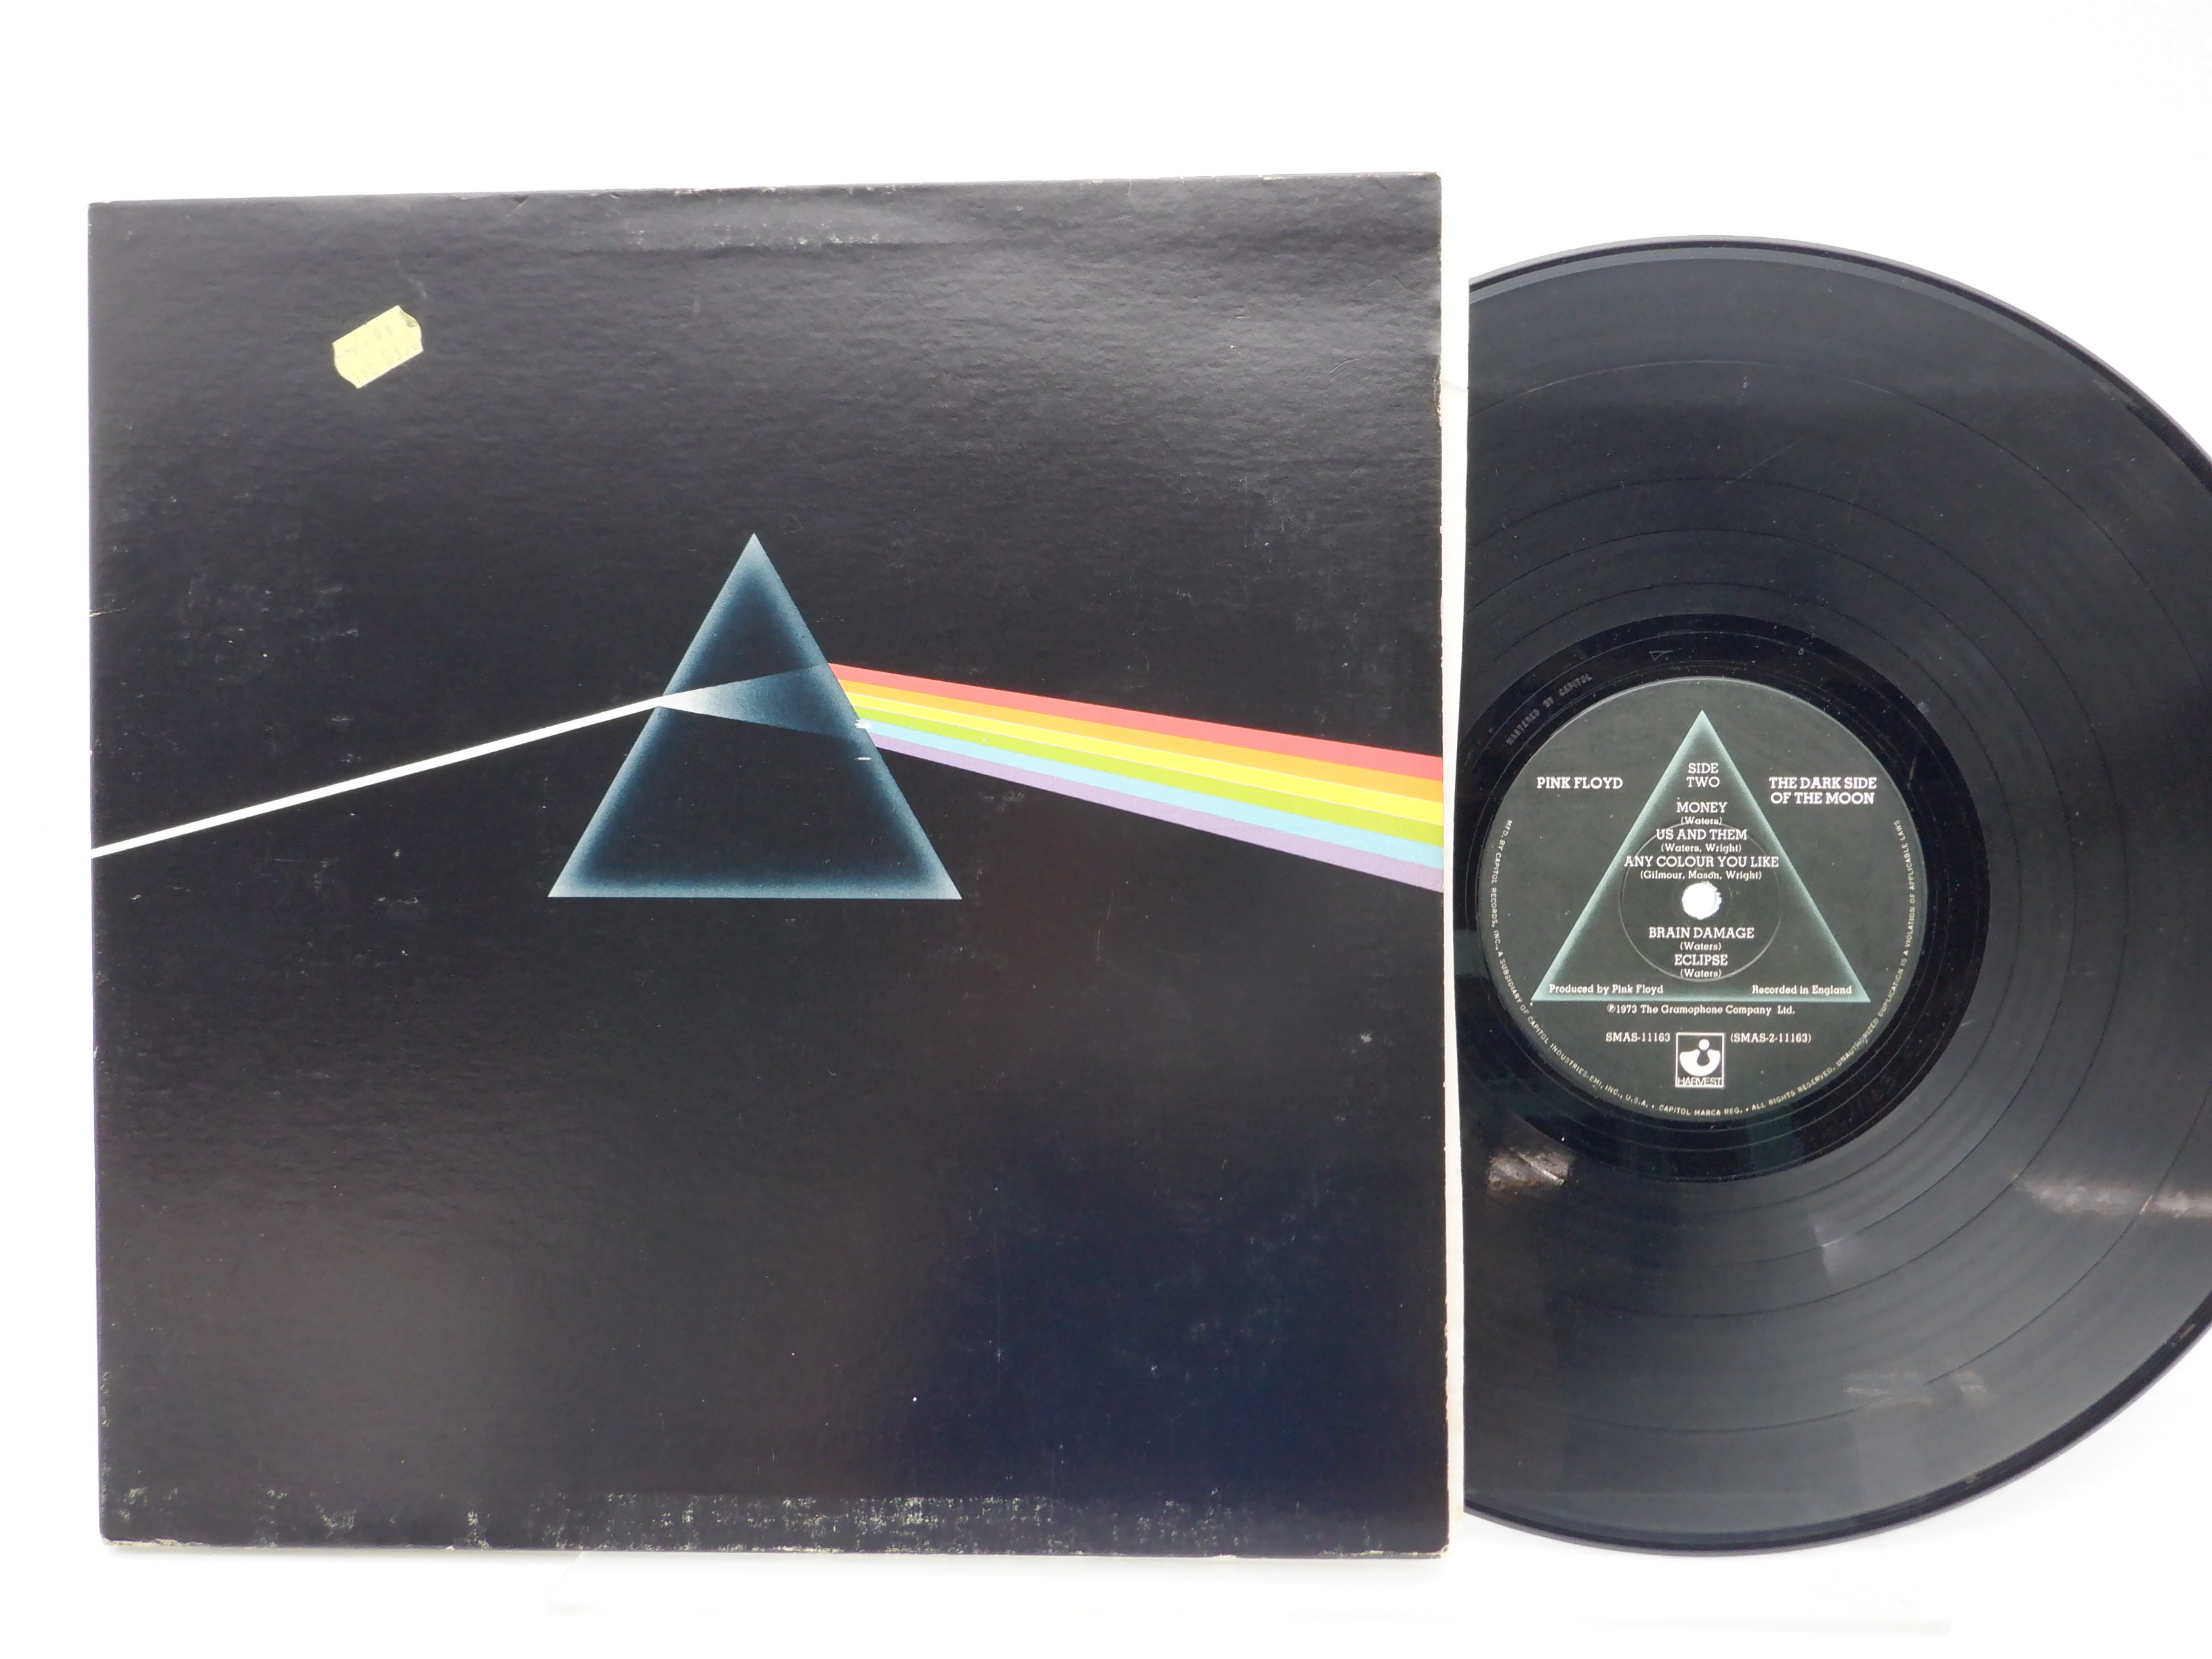 US盤】Pink Floyd(ピンク・フロイド)「The Dark Side Of The Moon(狂気